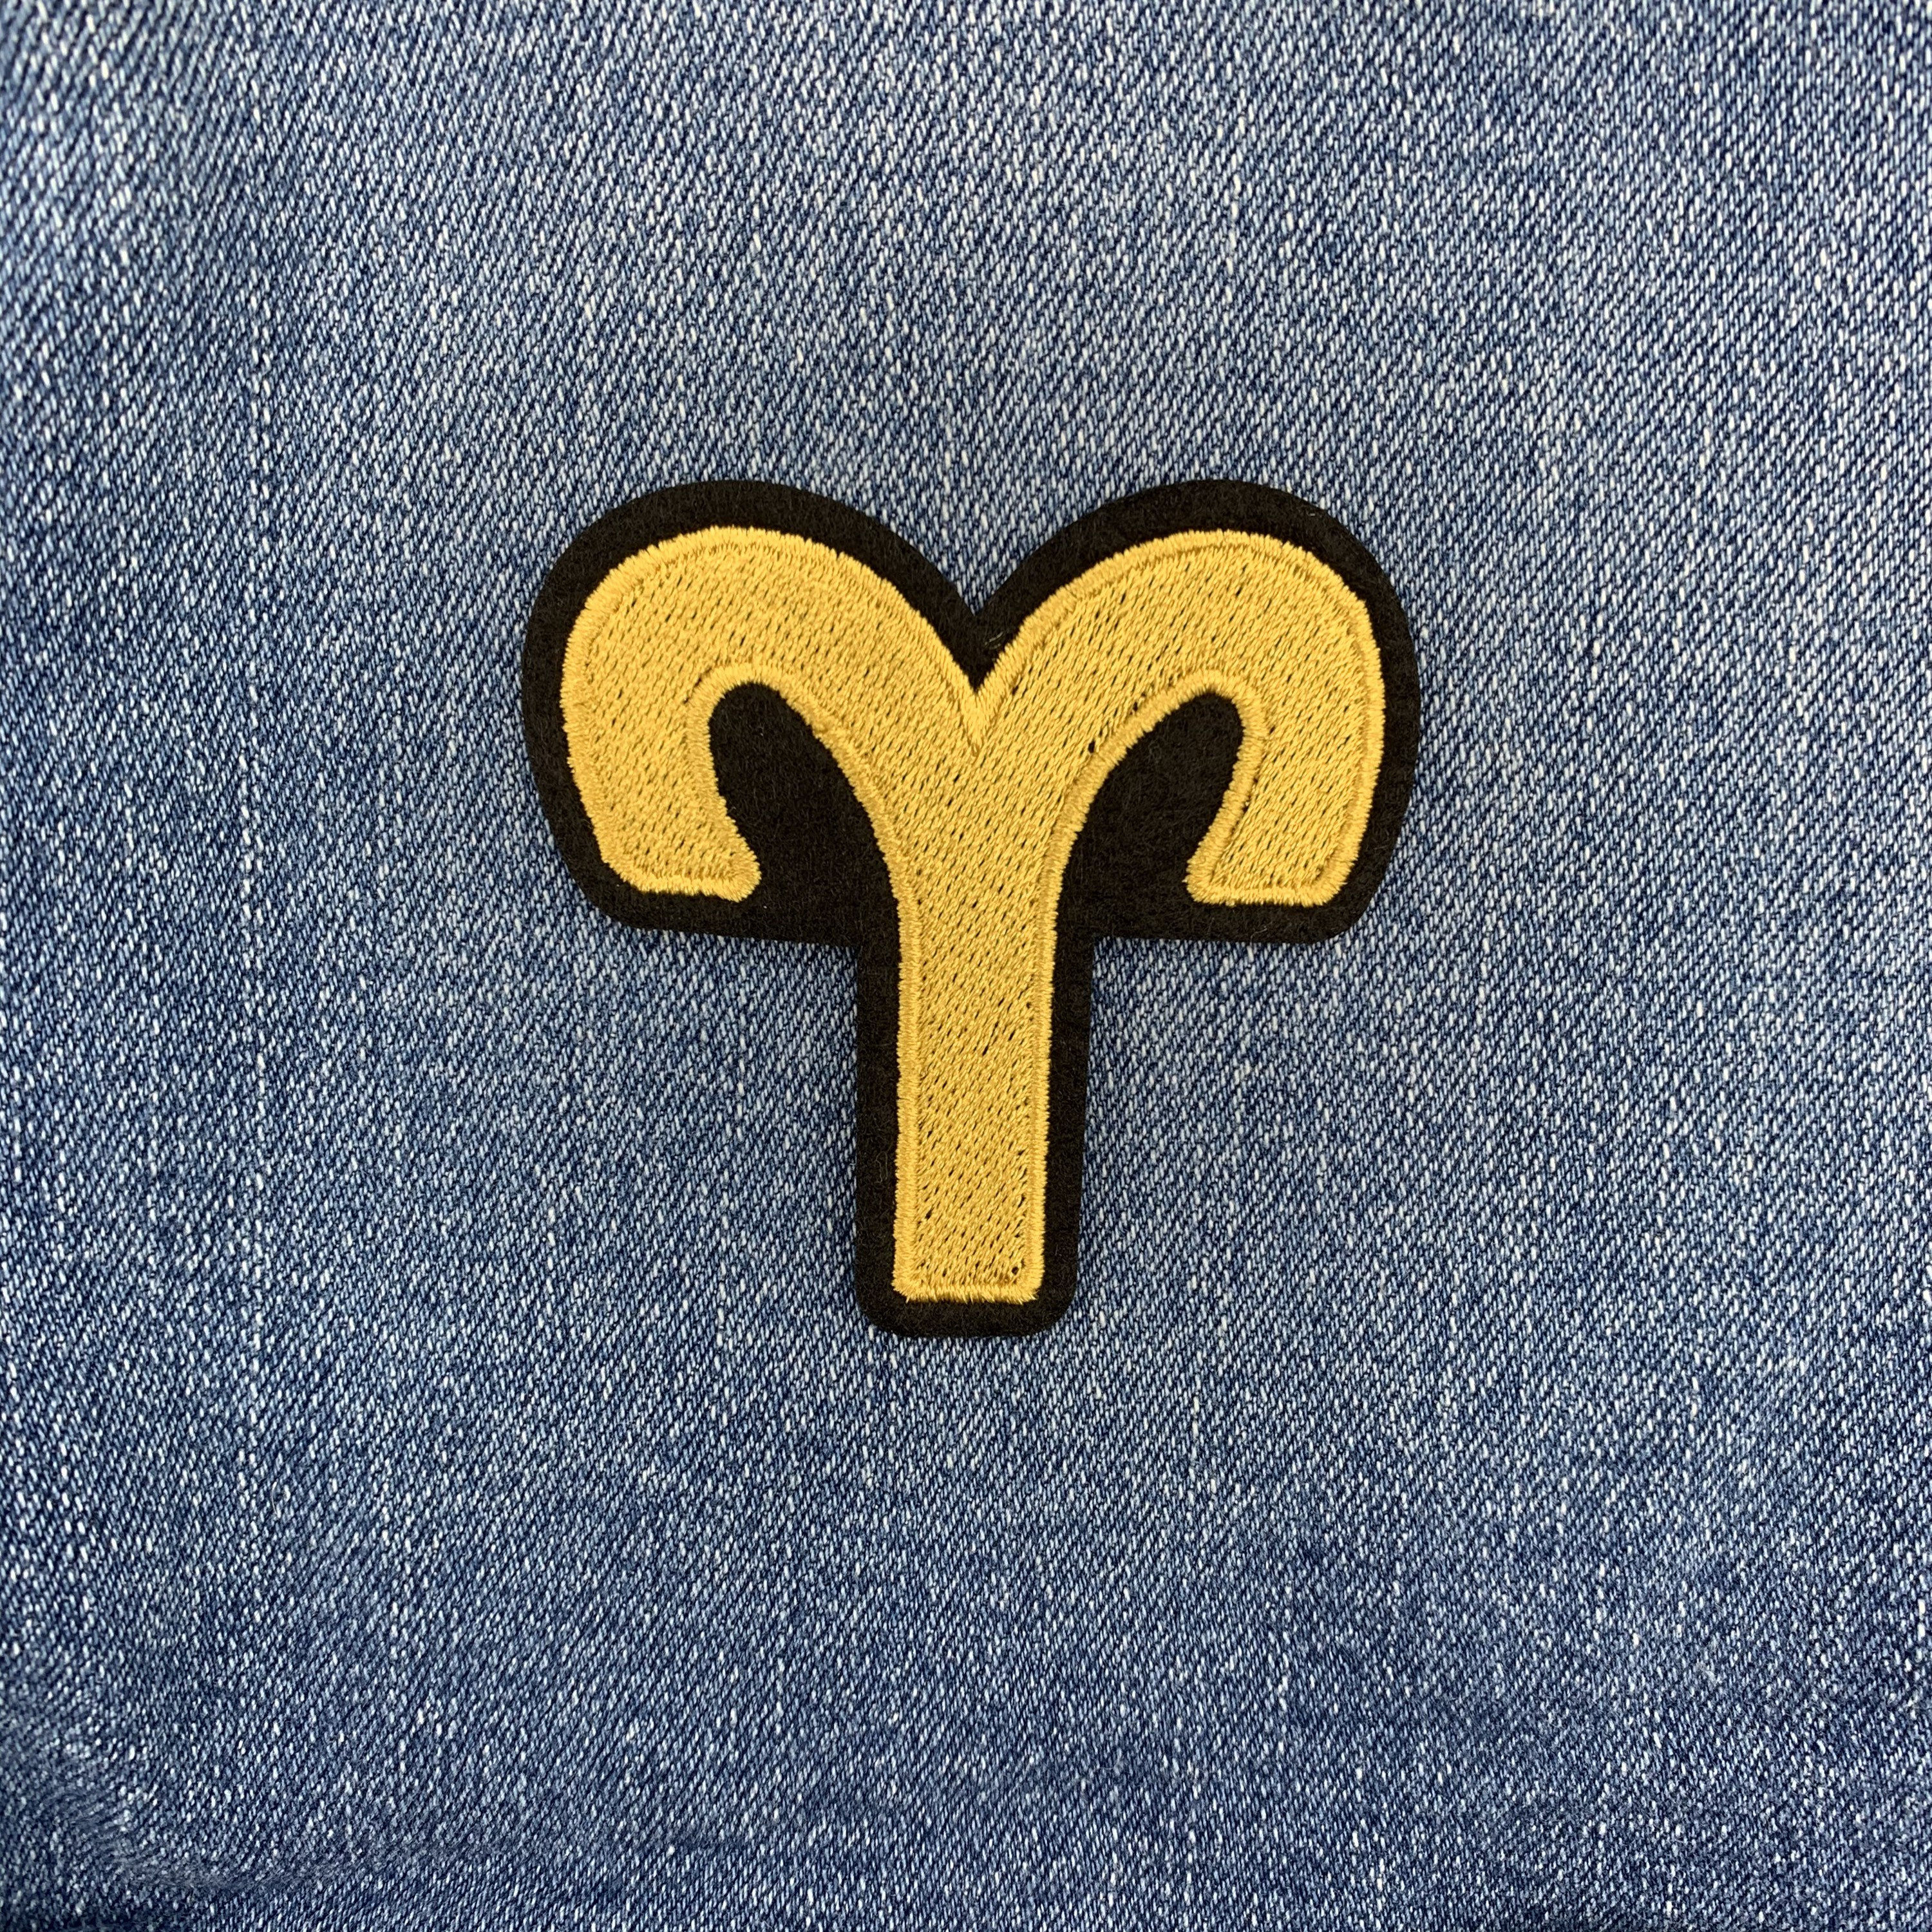 Aries | Ram Astrological Sign Iron On/Sew On Patch | March 20 - April 19